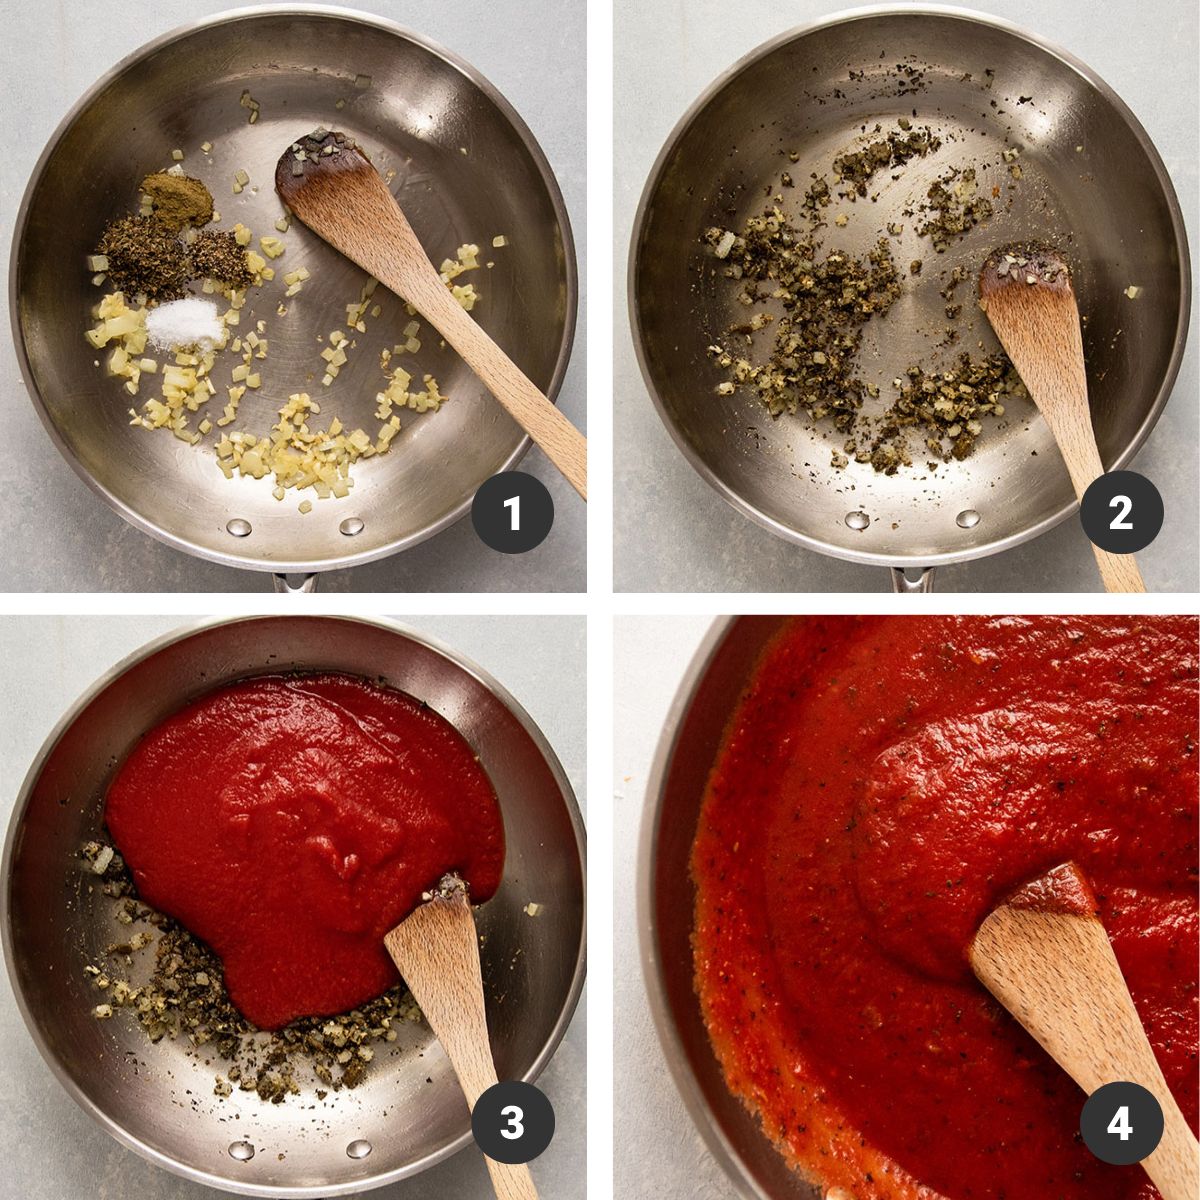 Mixing pizza sauce ingredients together with a wooden spoon in a large silver skillet.